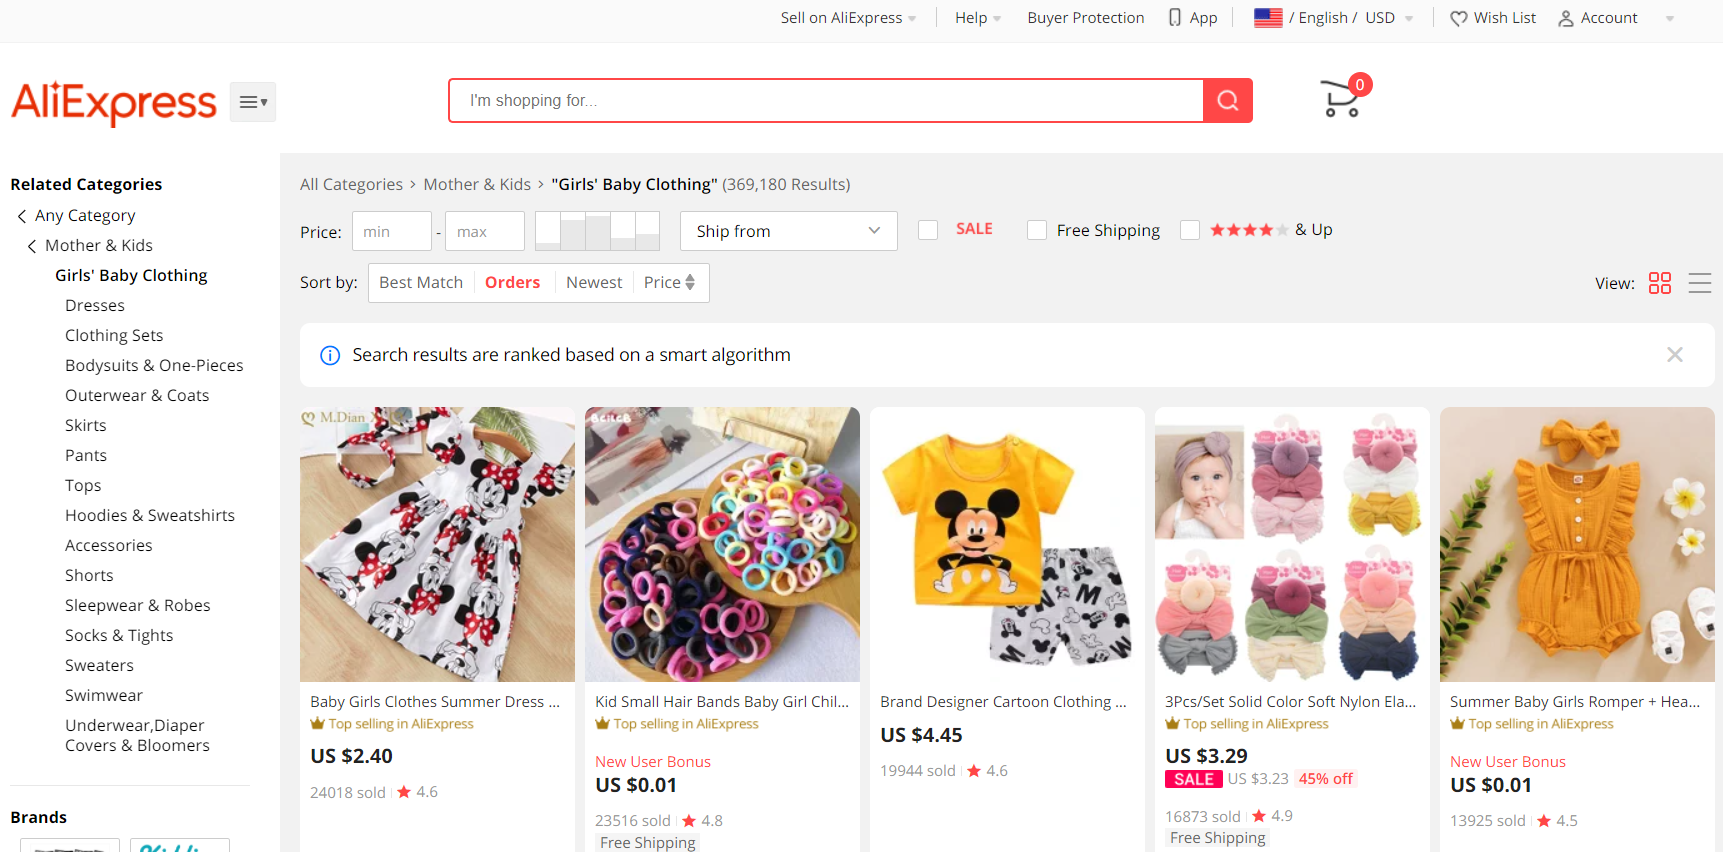 Find the best sellers on Aliexpress by sorting the products by the number of orders